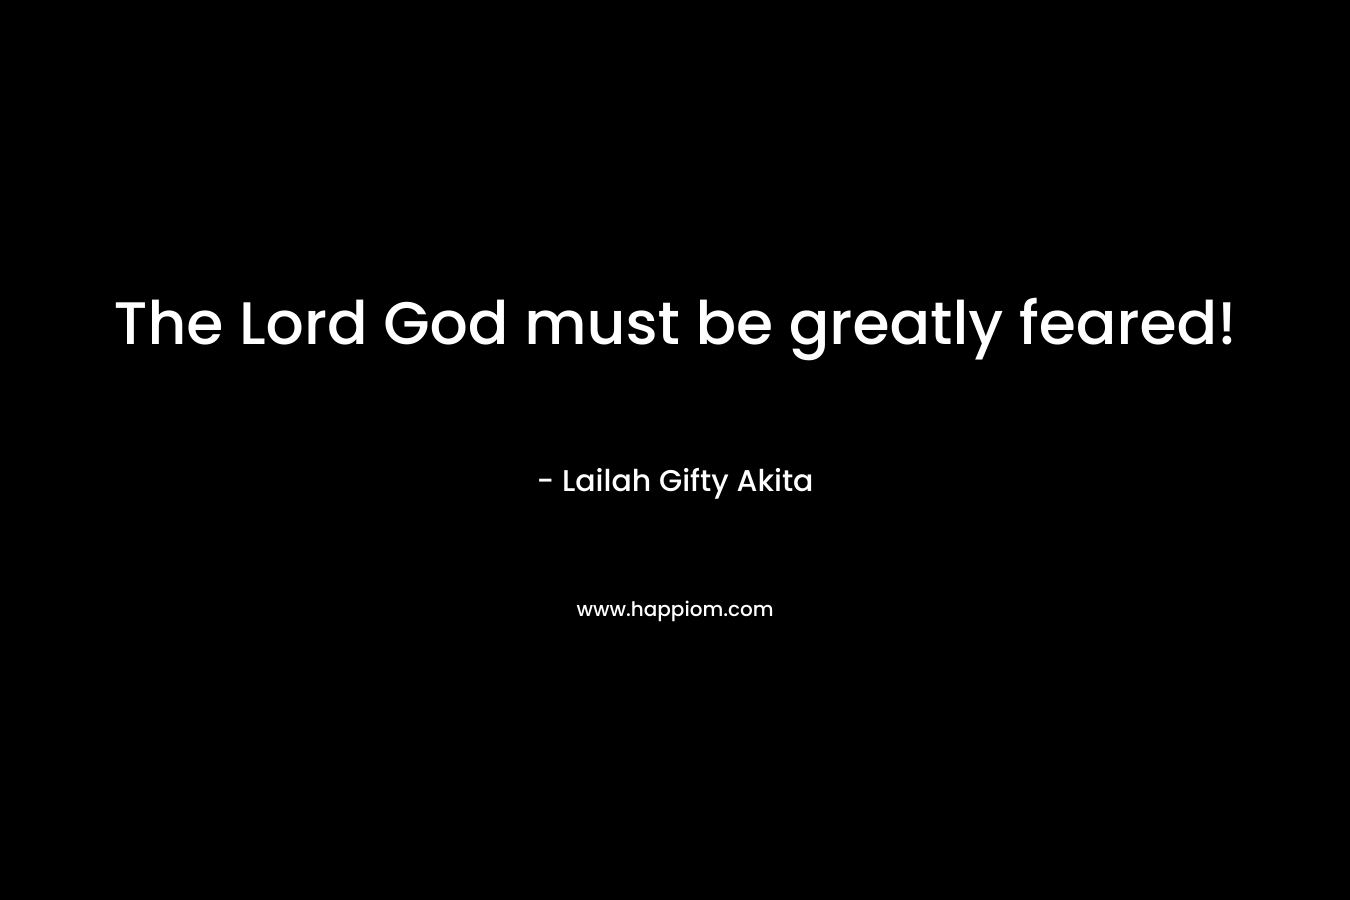 The Lord God must be greatly feared! – Lailah Gifty Akita